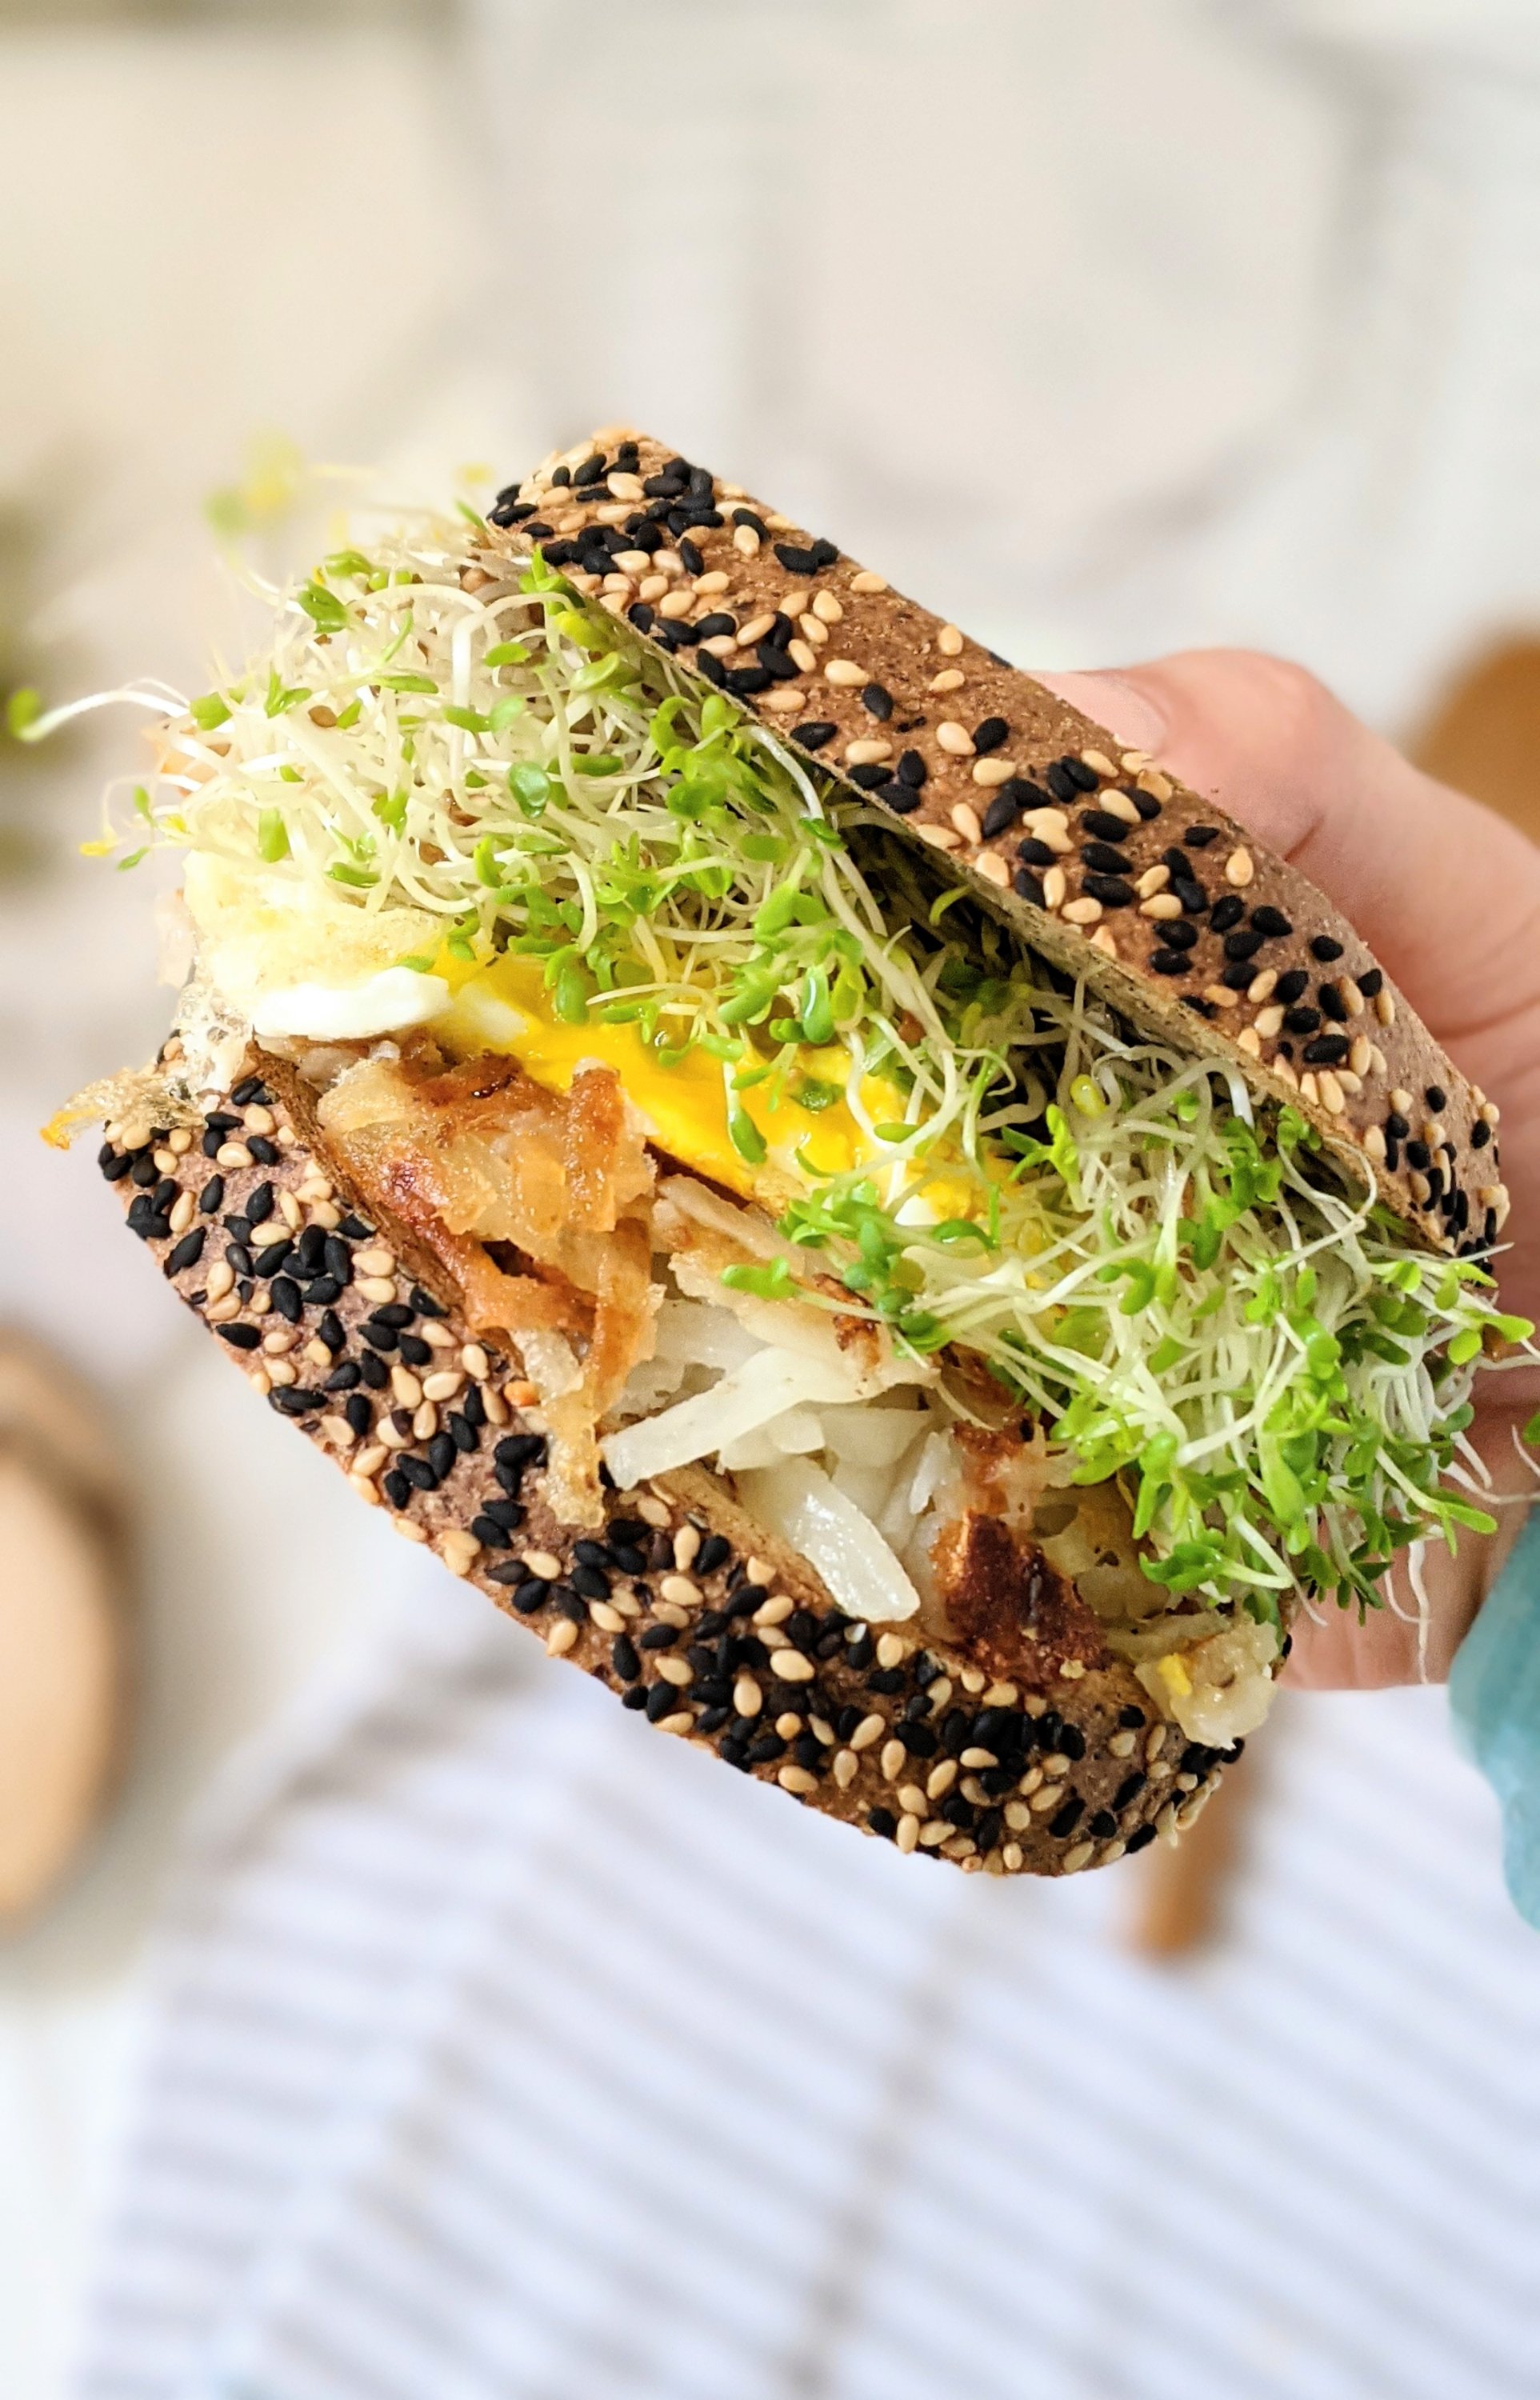 hash brown breakfast sandwich vegan and gluten free options healthy plant based weekend brunch ideas and recipes